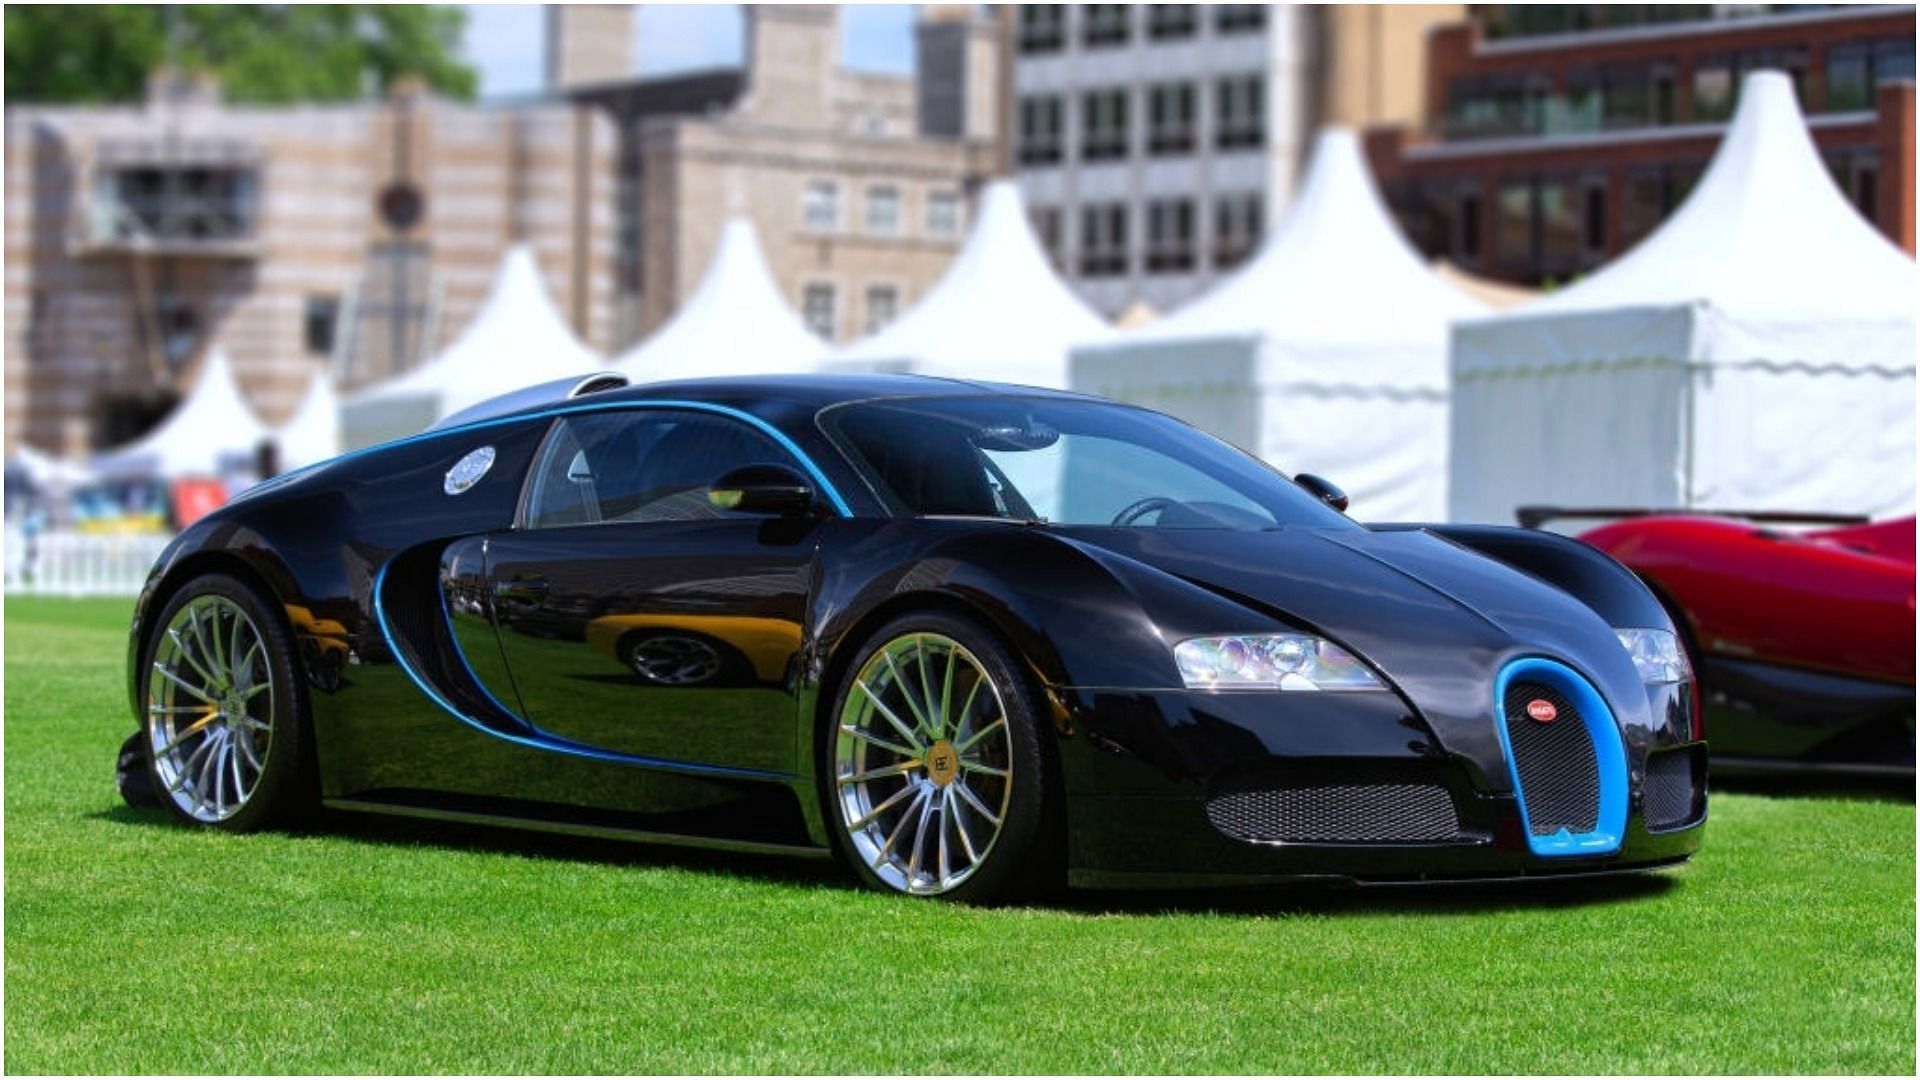 Sources say that Ye owns a Bugatti Veyron (Image via Martyn Lucy/Getty Images)